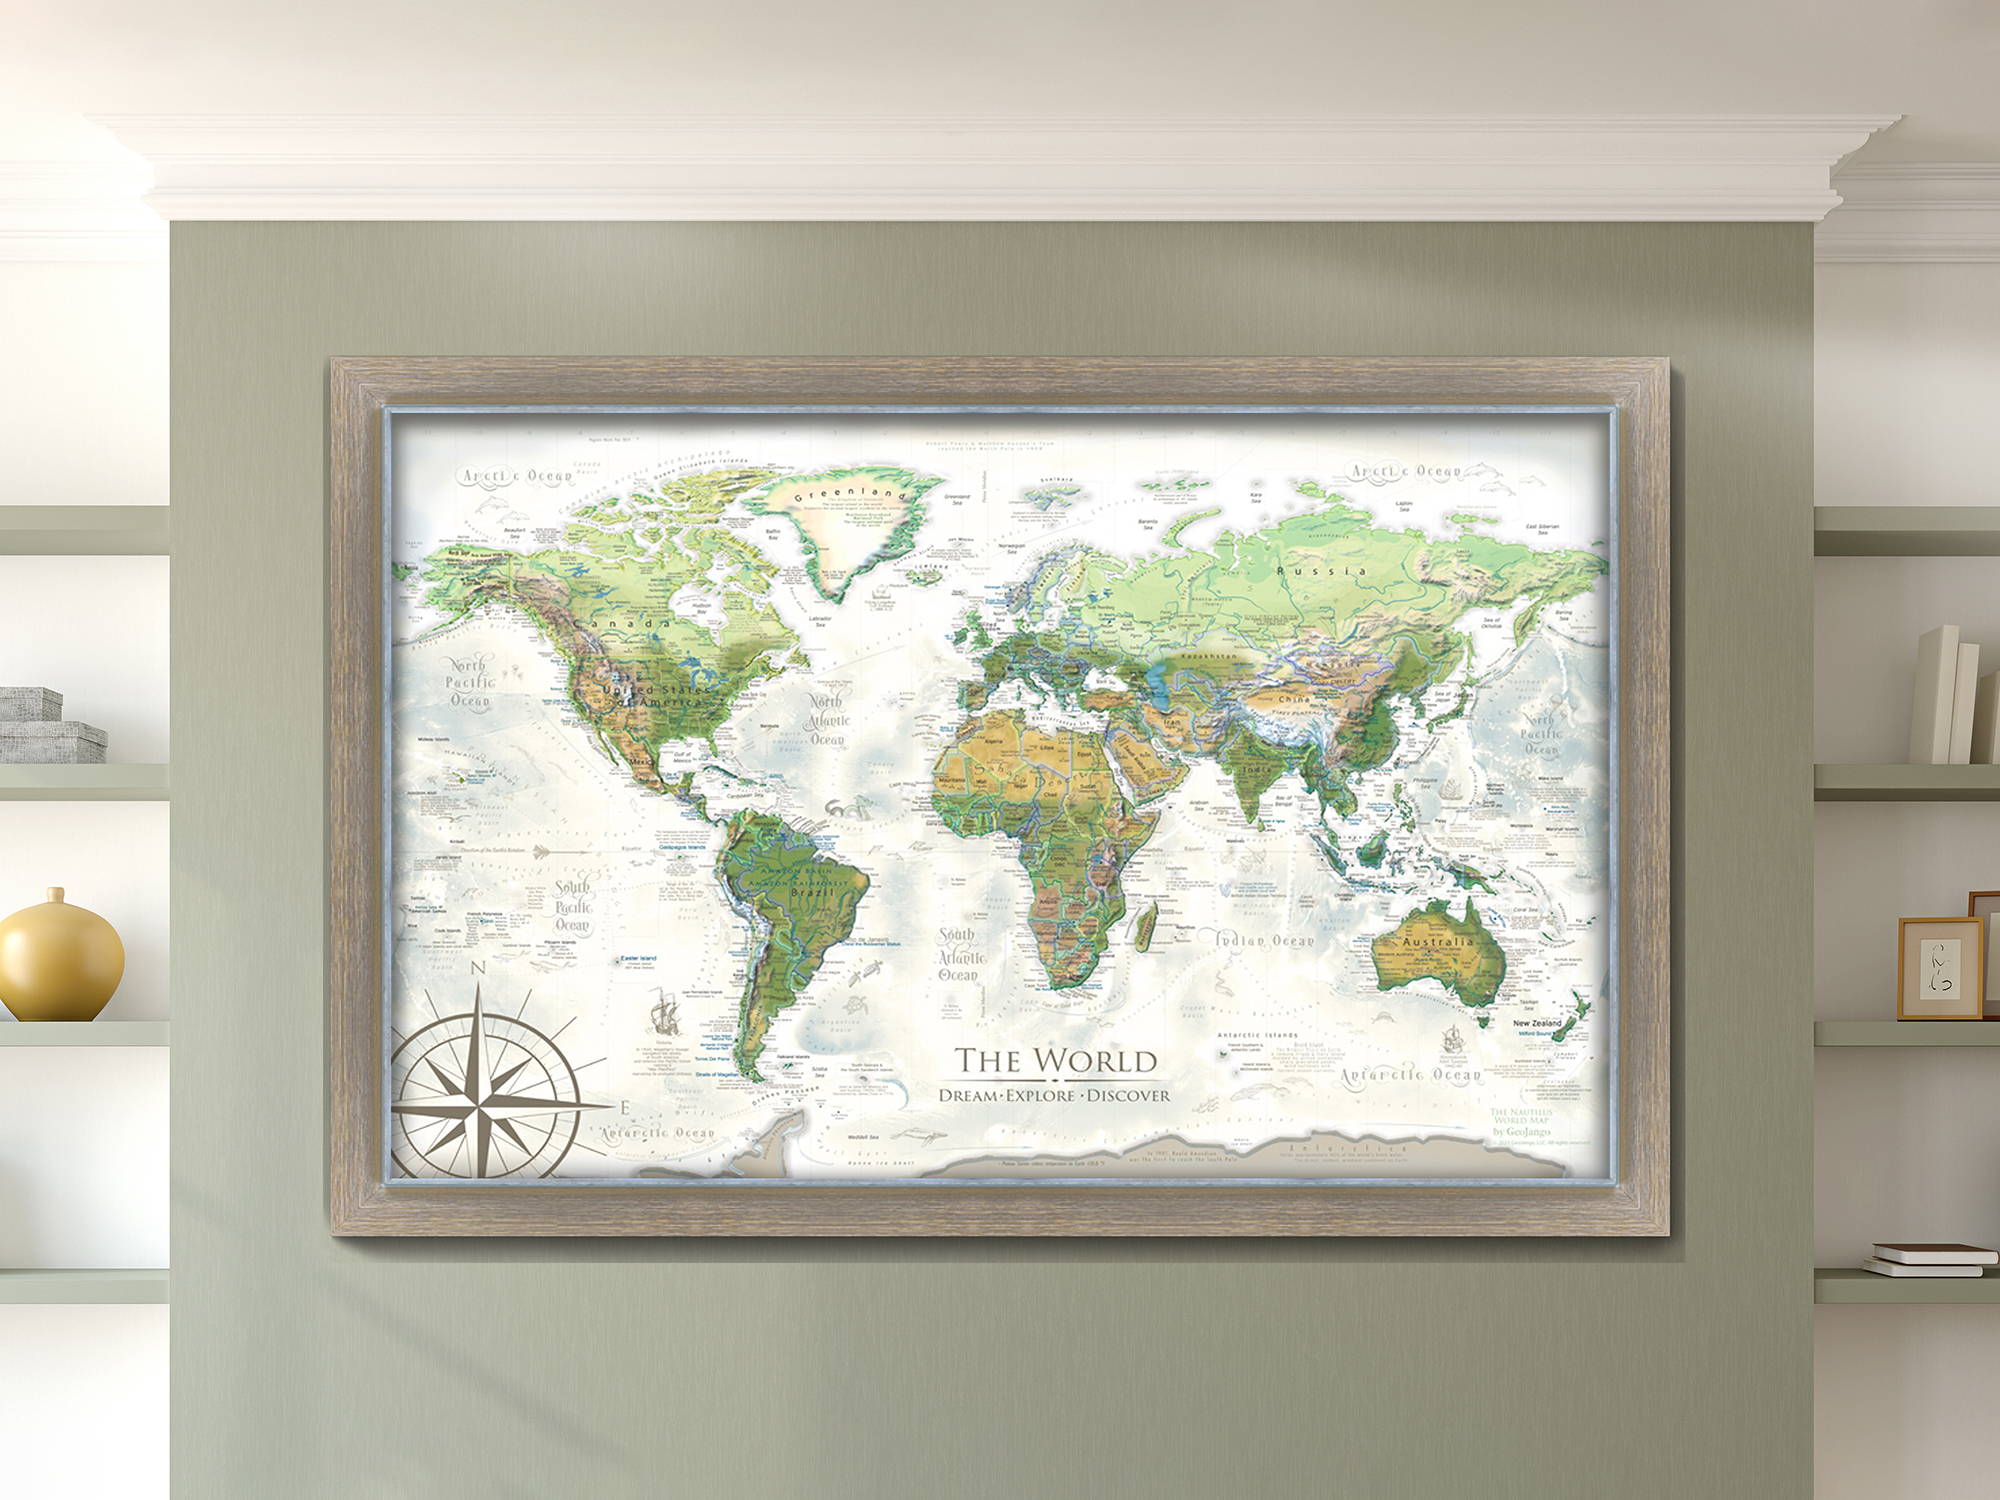 High-quality framed world map for pinning locations